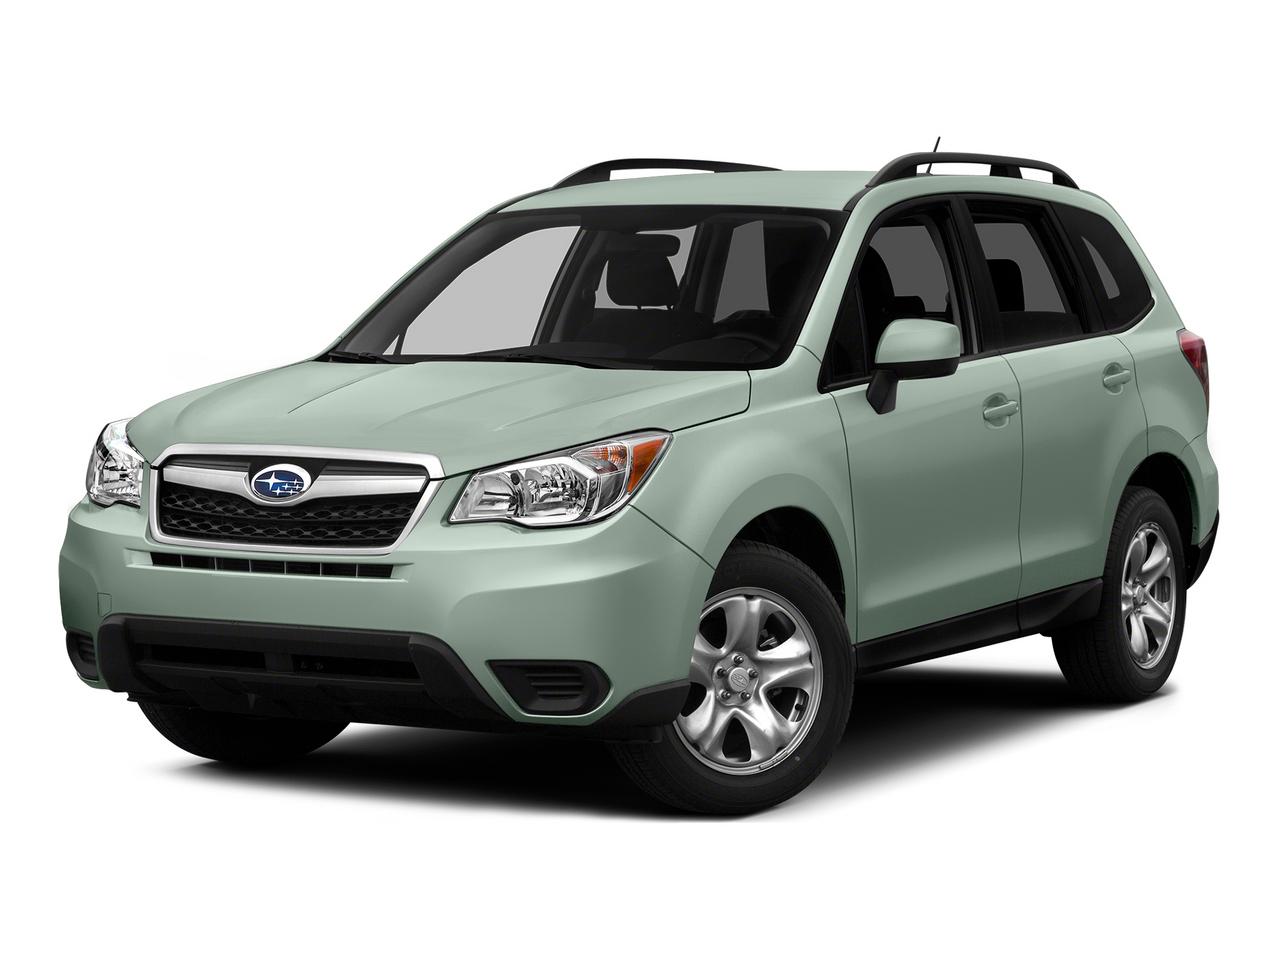 2015 Subaru Forester Vehicle Photo in CAPE MAY COURT HOUSE, NJ 08210-2432